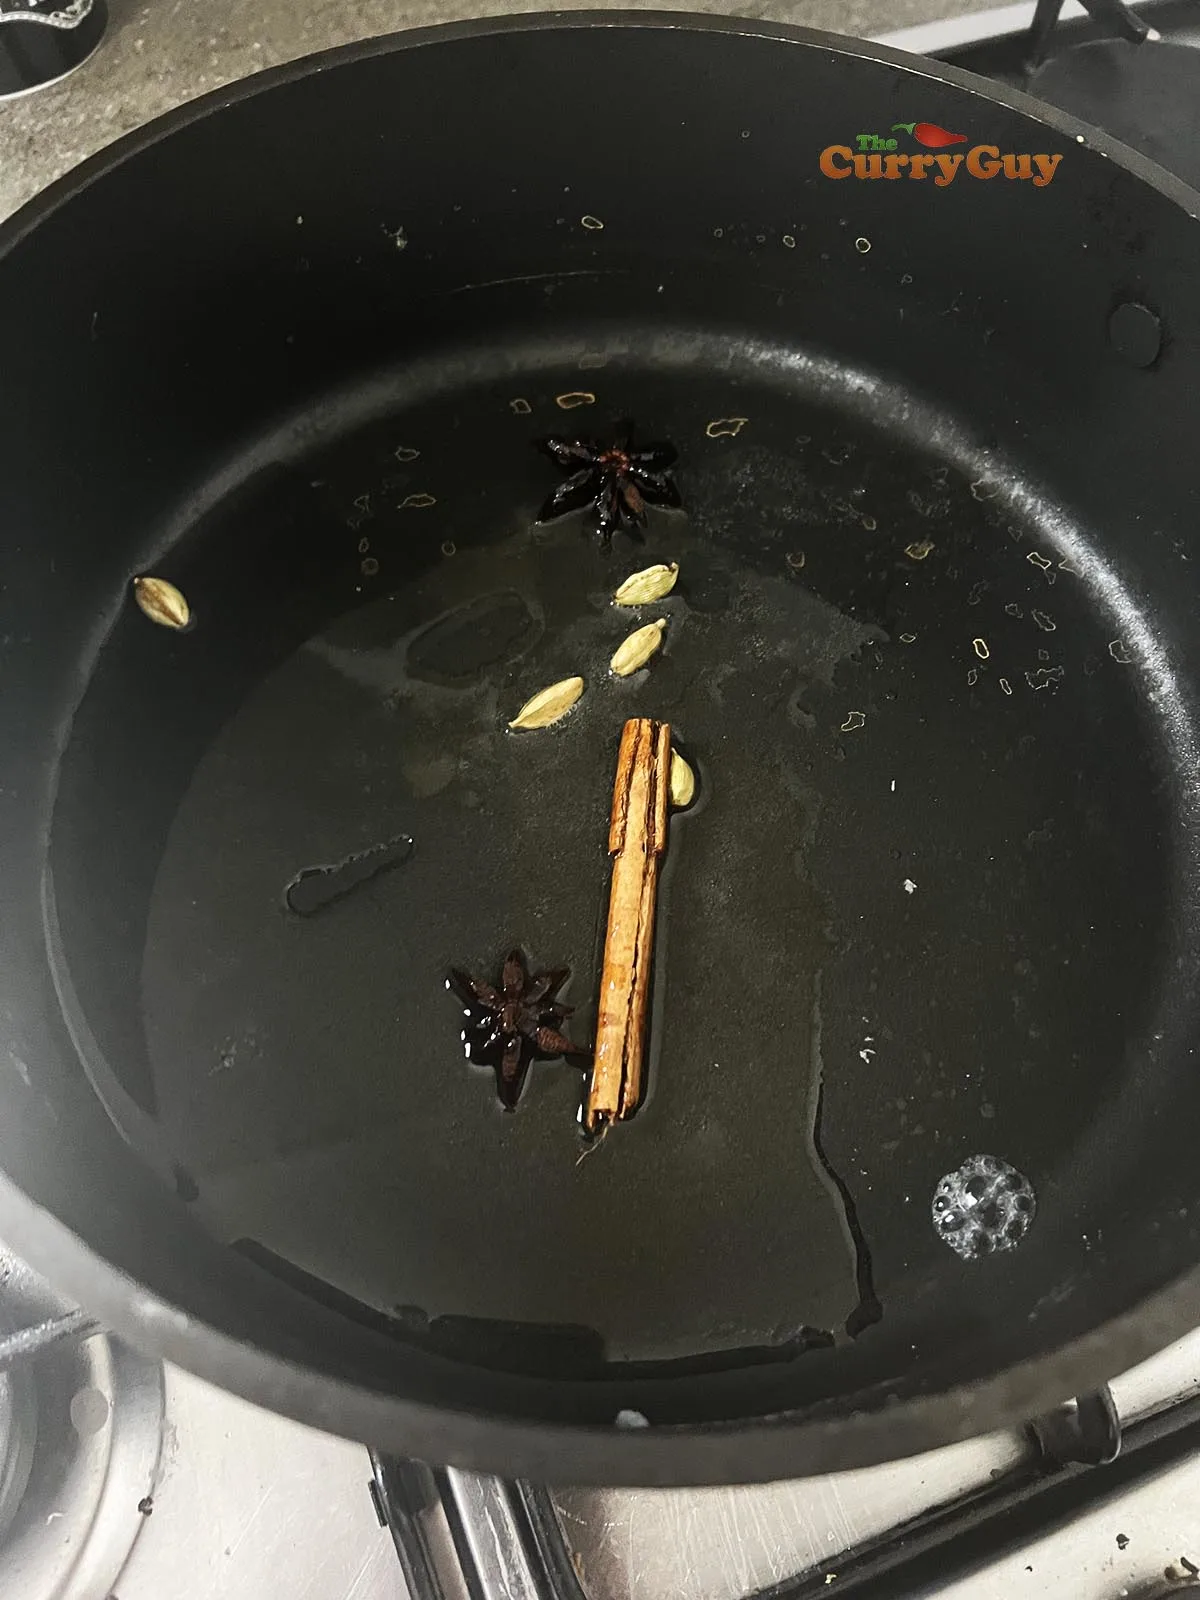 Infusing whole spices into hot oil.